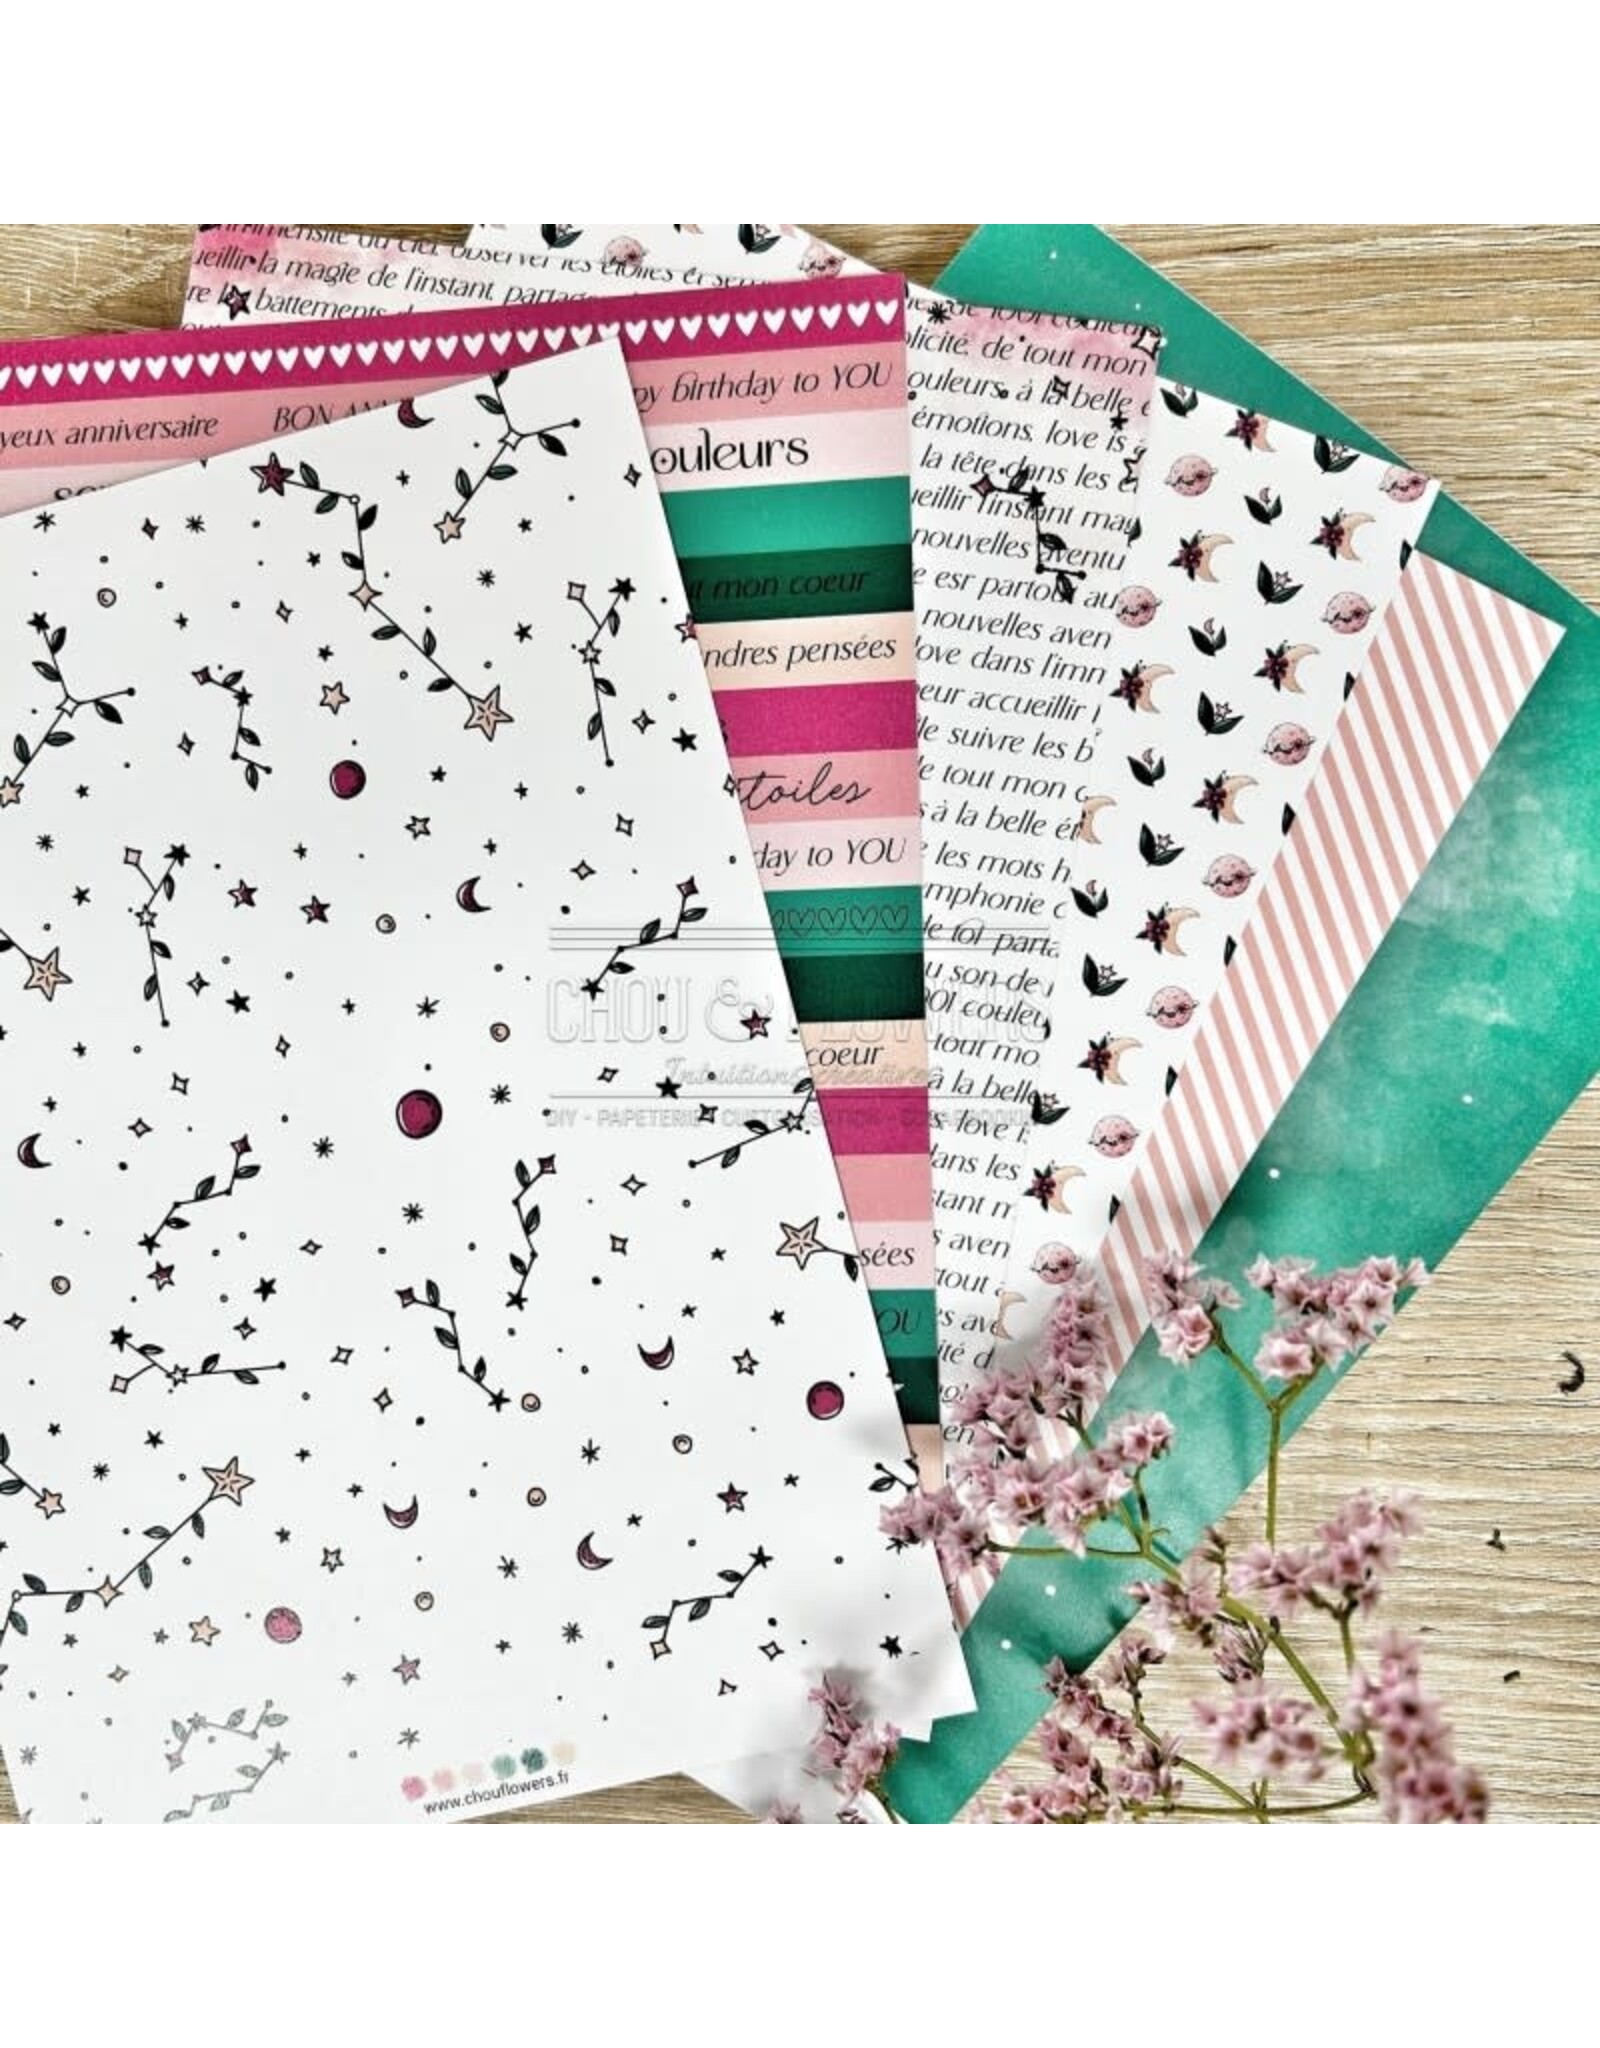 CHOU & FLOWERS CHOU & FLOWERS HORS-SÉRIE DOUDOULAND LES ASTROS COLLECTION A5 PAPETERIE CRÉATIVE COLLECTION PACK